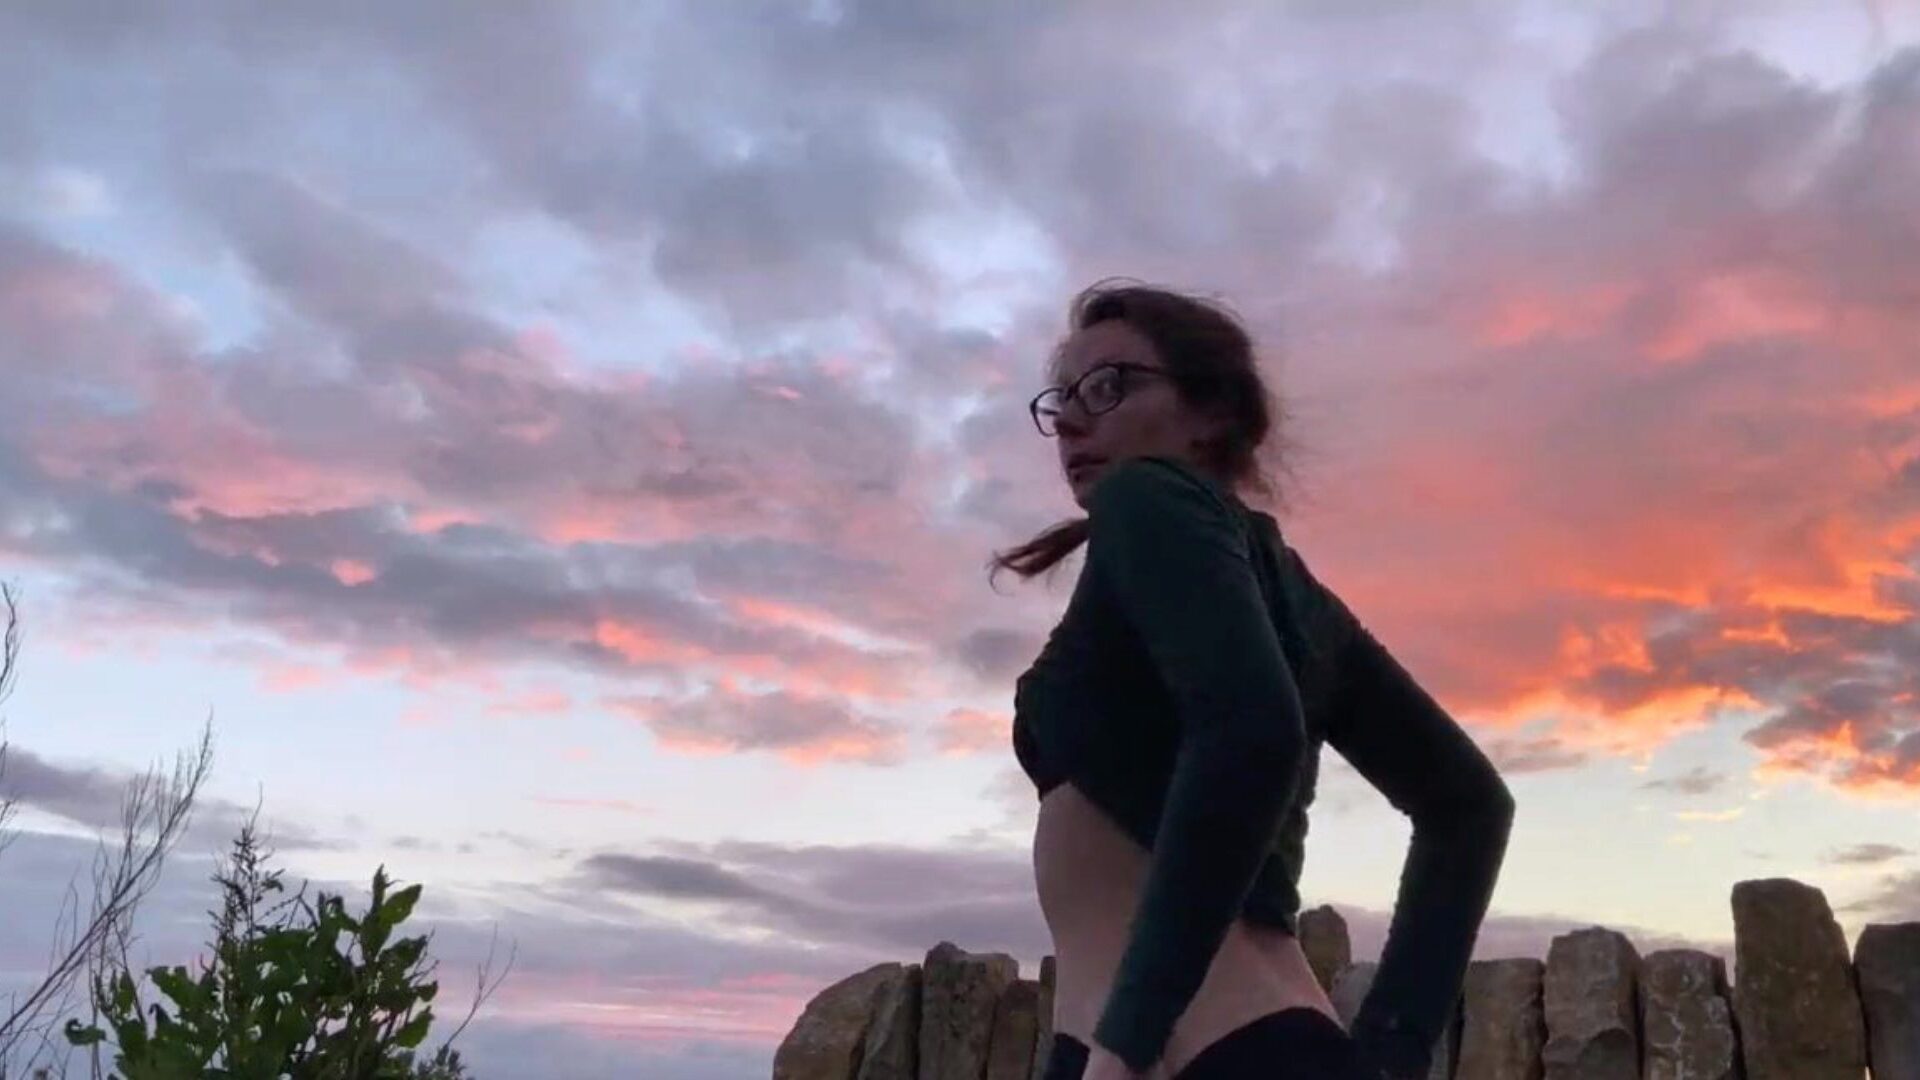 ultra-cute legal age teenager pumped while the sun sets in a public park - Hannah Goode